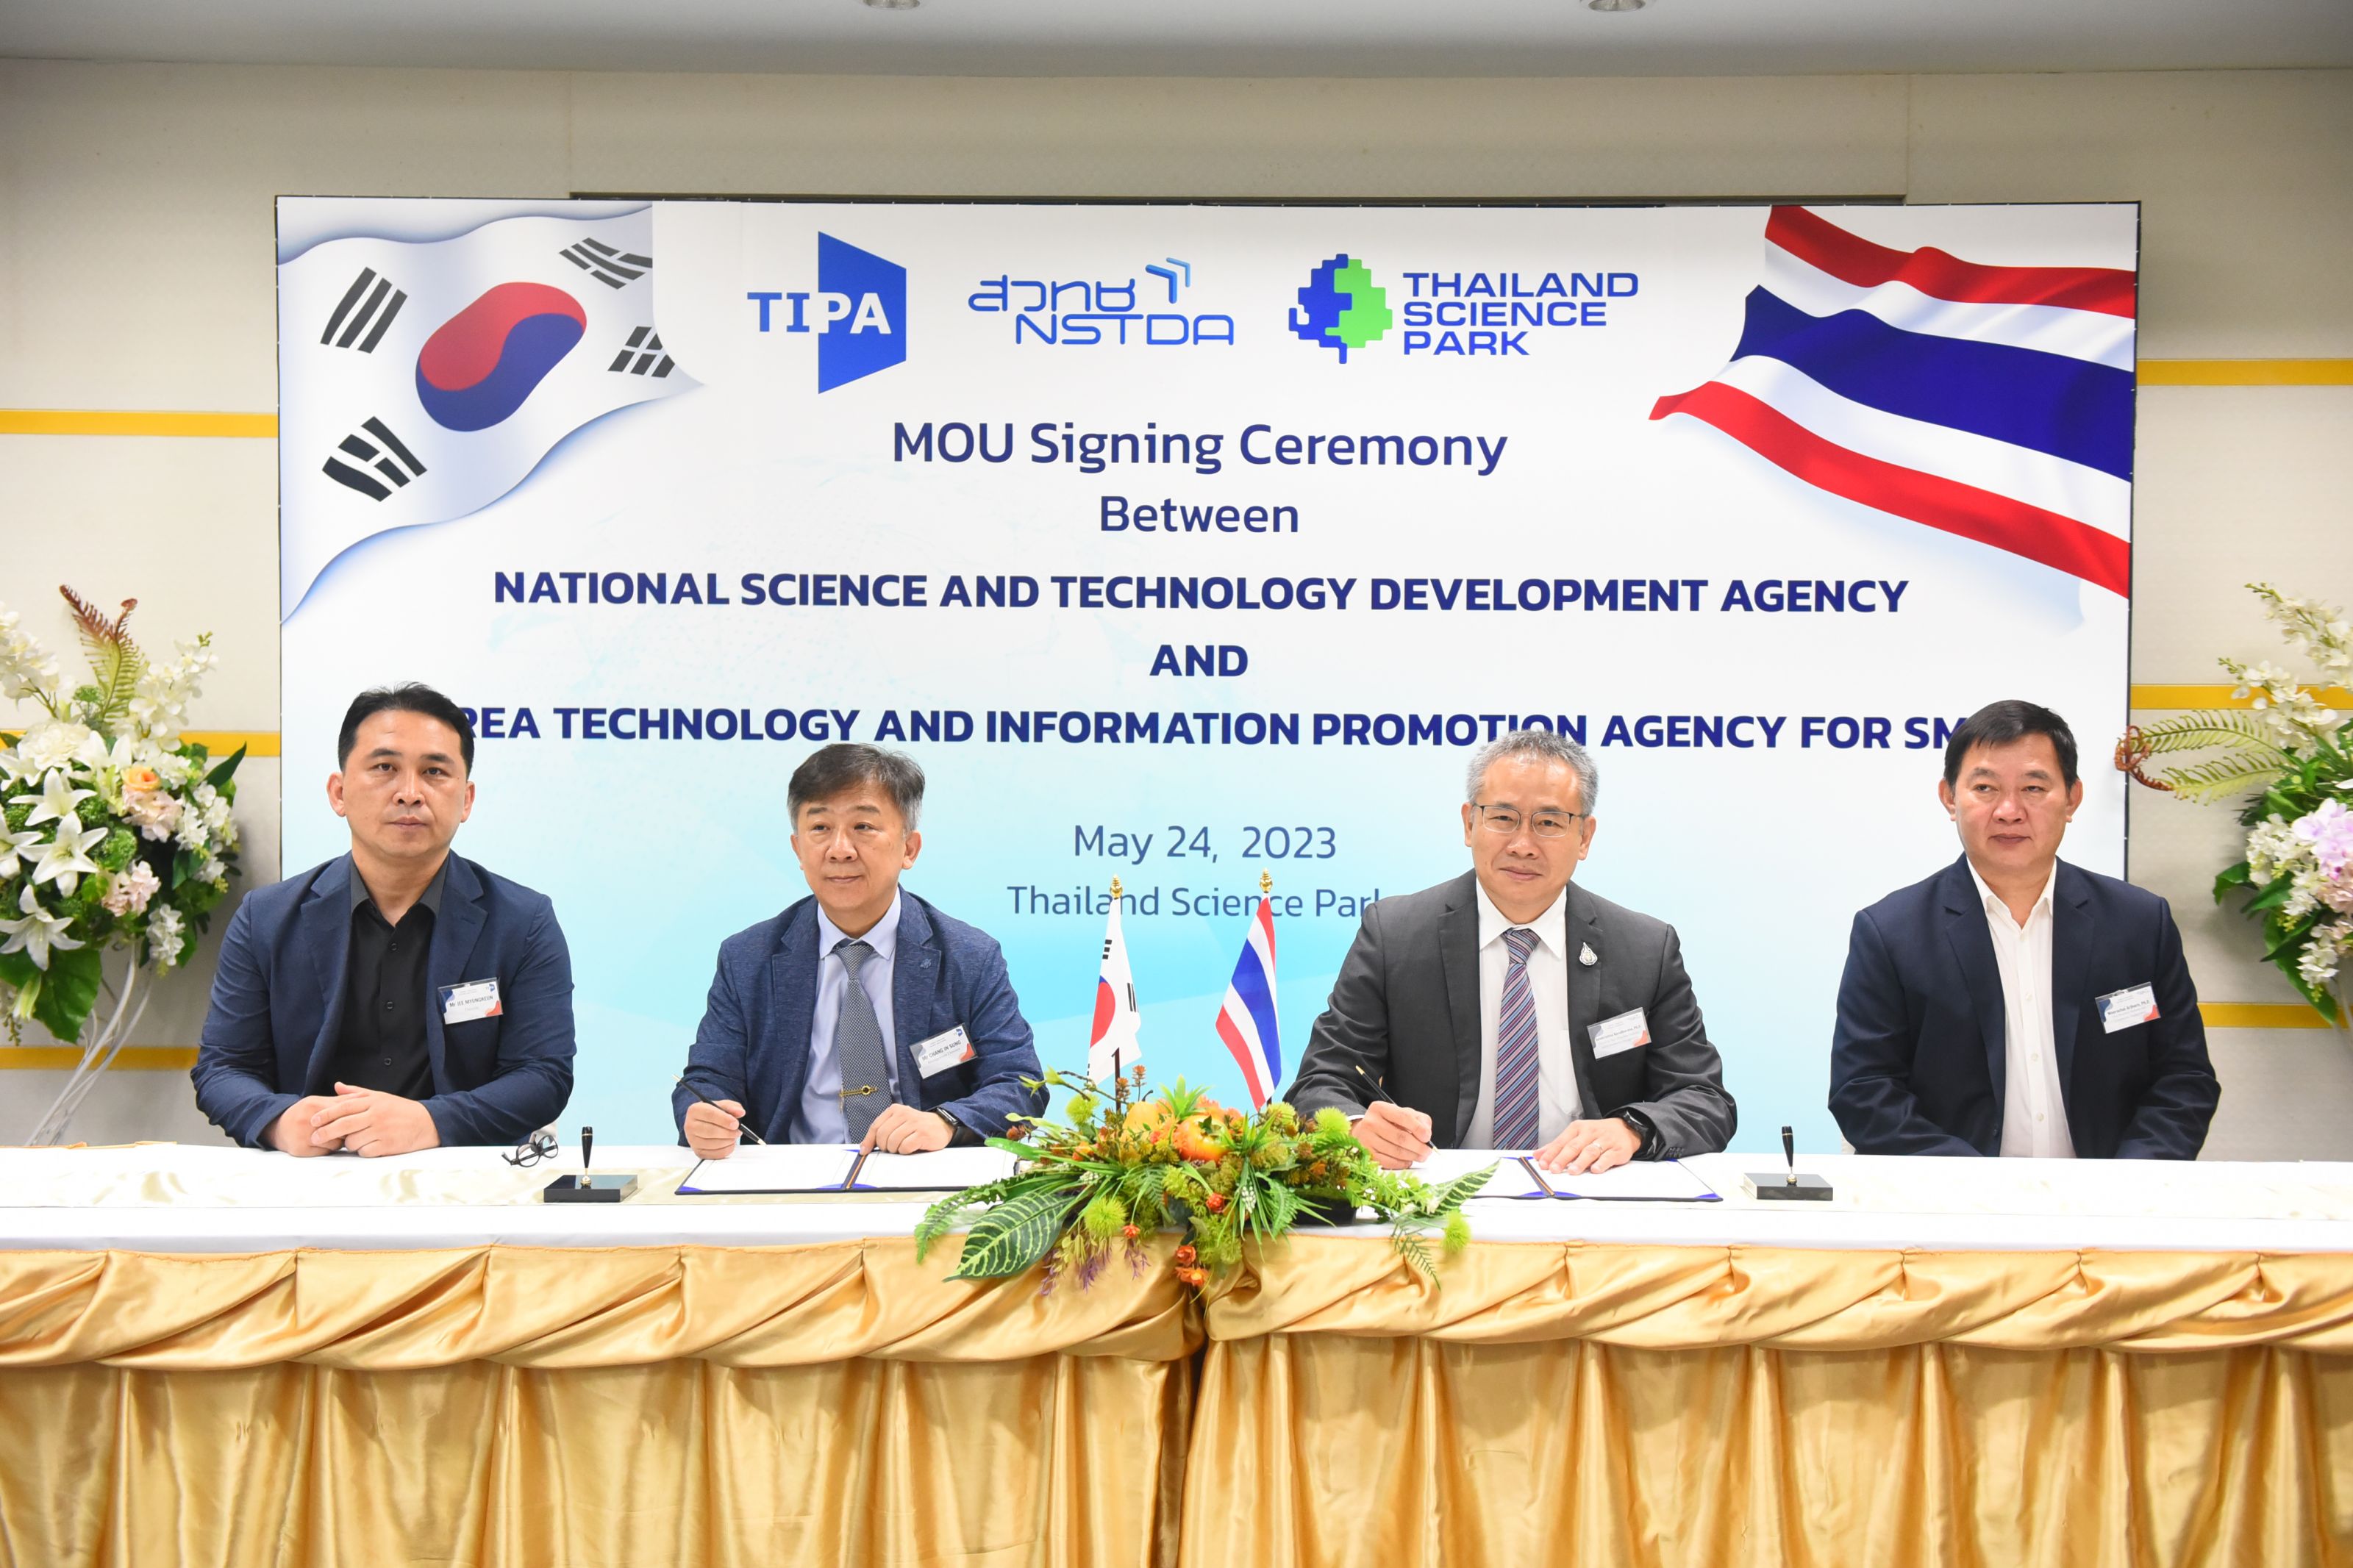 Thailand Science Park: A New Frontier for Thai-Korean R&D Partnership as TIPA and NSTDA Sign MOU